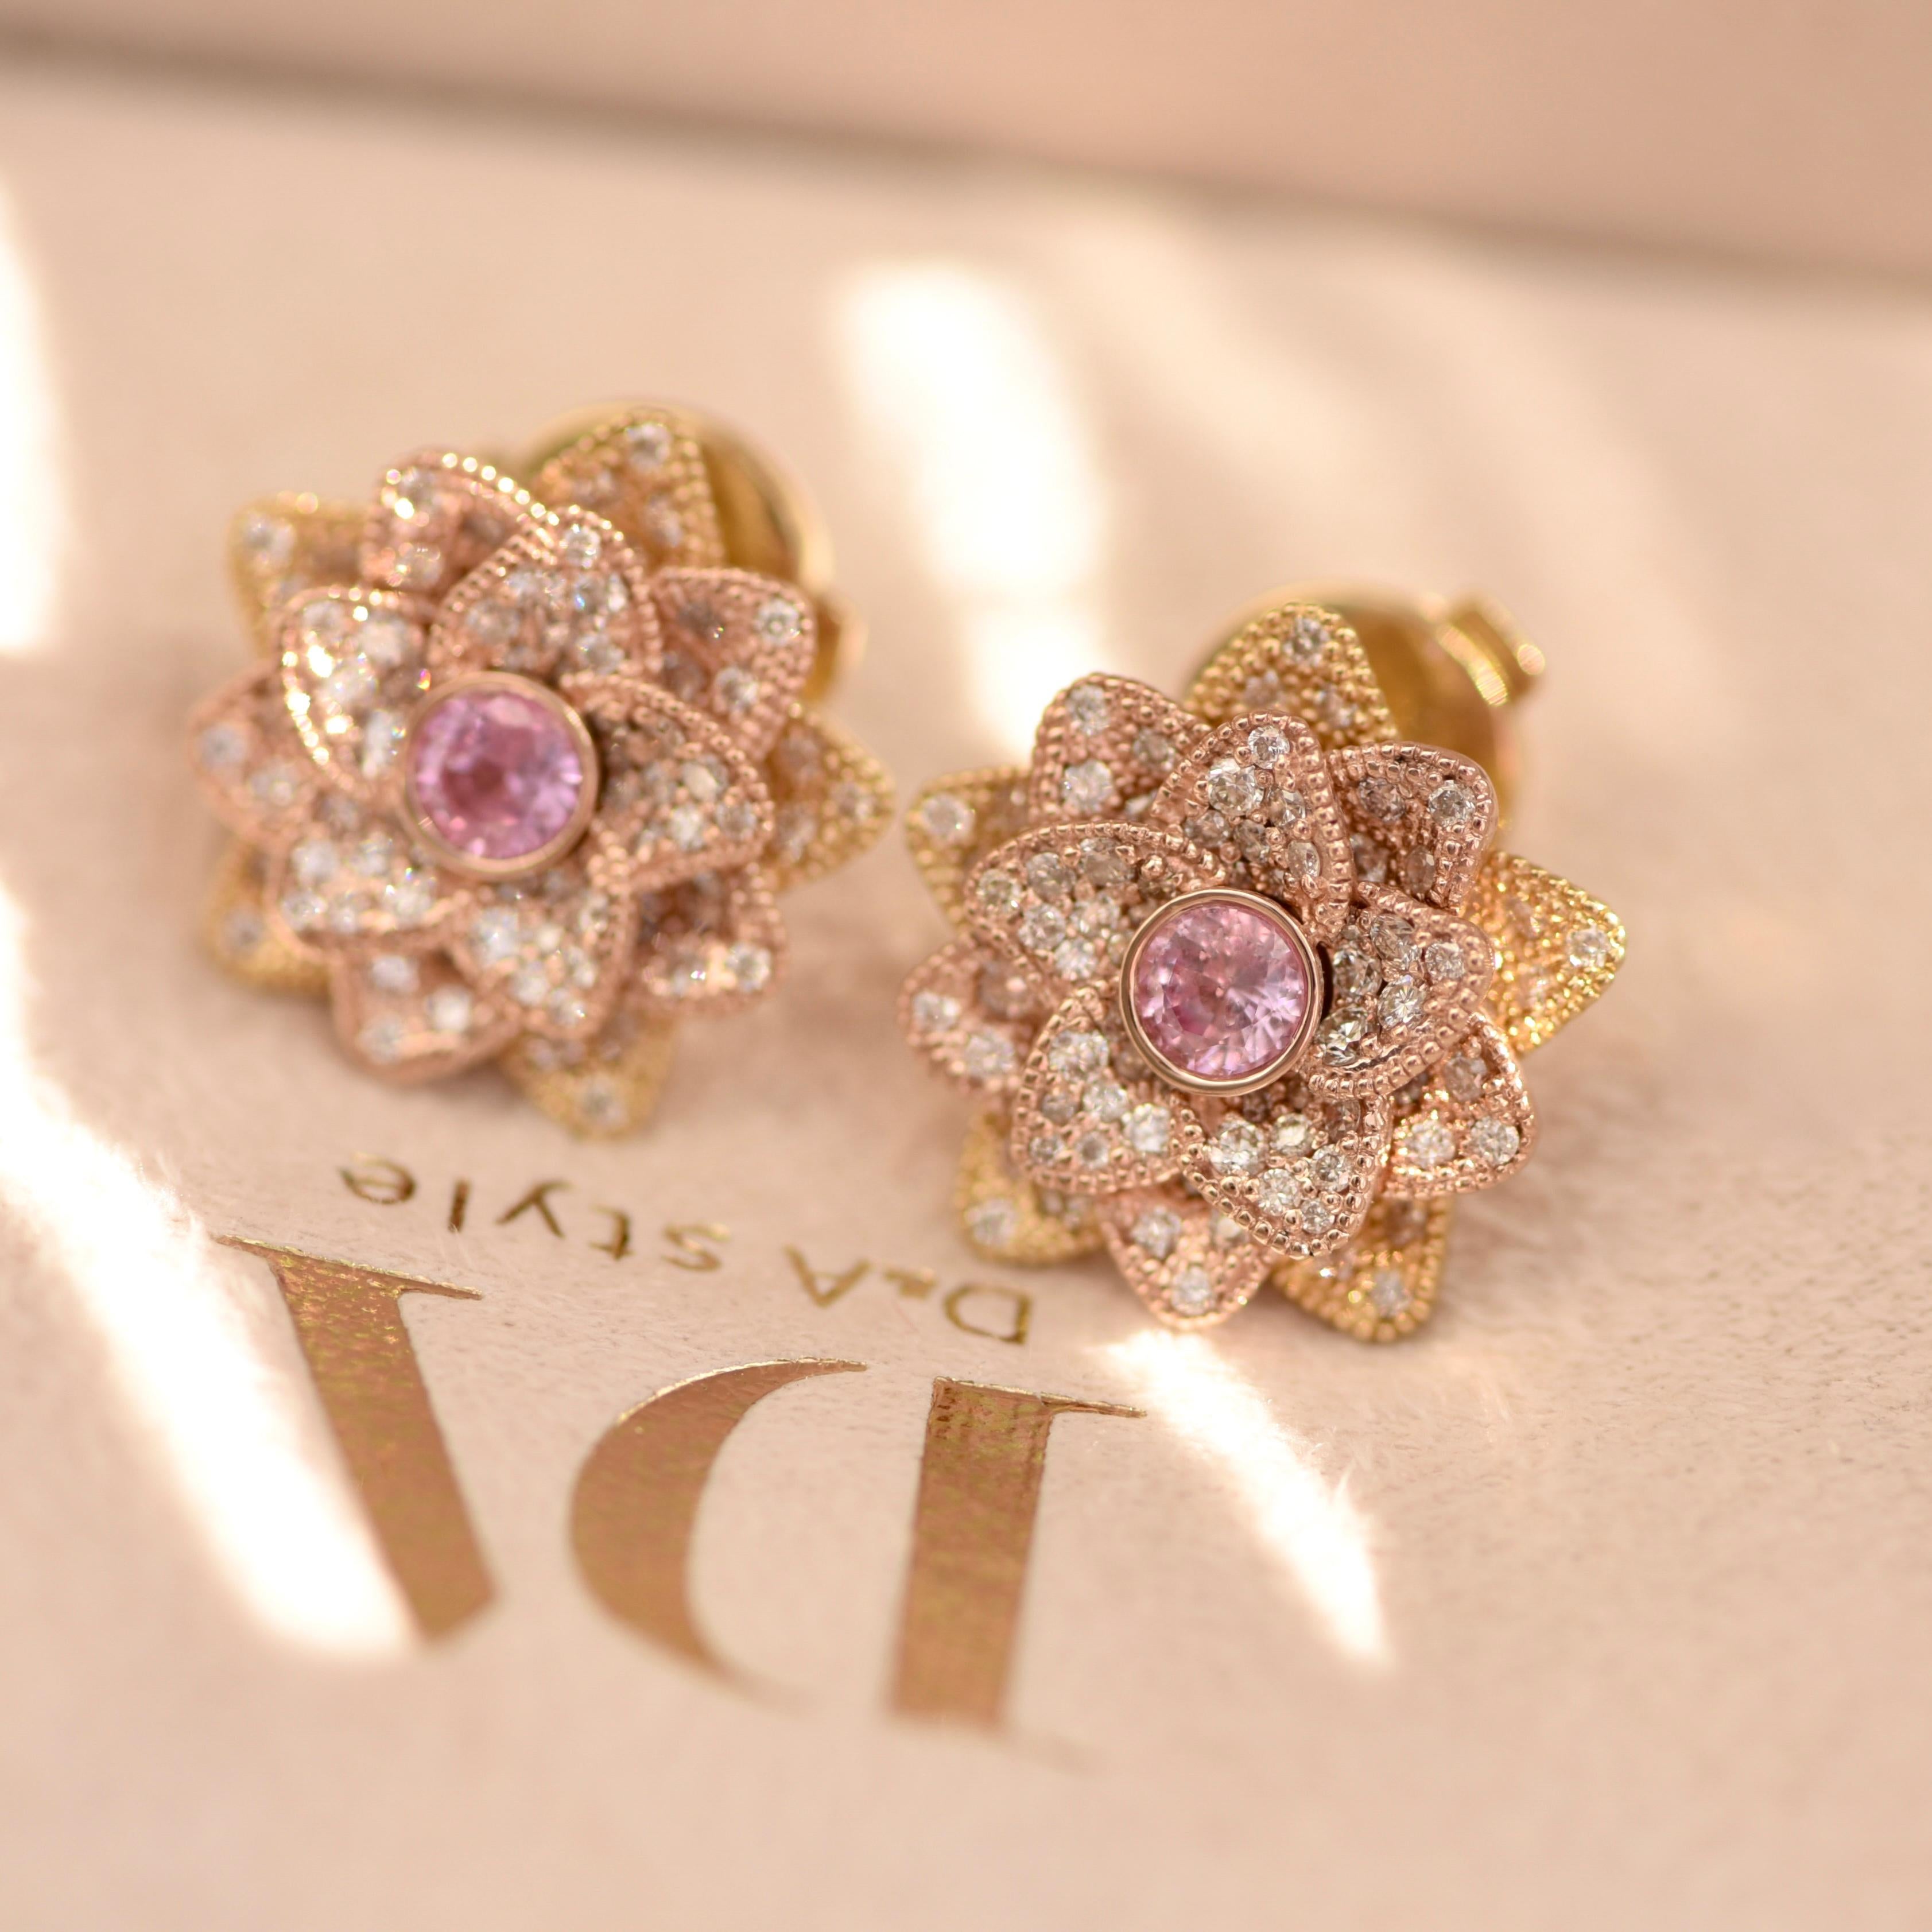 Most Coveted Rarity – the Lotus Collection by D&A. 
This collection is desirable as it features the much sought after new wave of rare gems, the Pink Sapphire. The lotus blooming flower, speckled with soft Pink Sapphire, undeniably adds a demure and